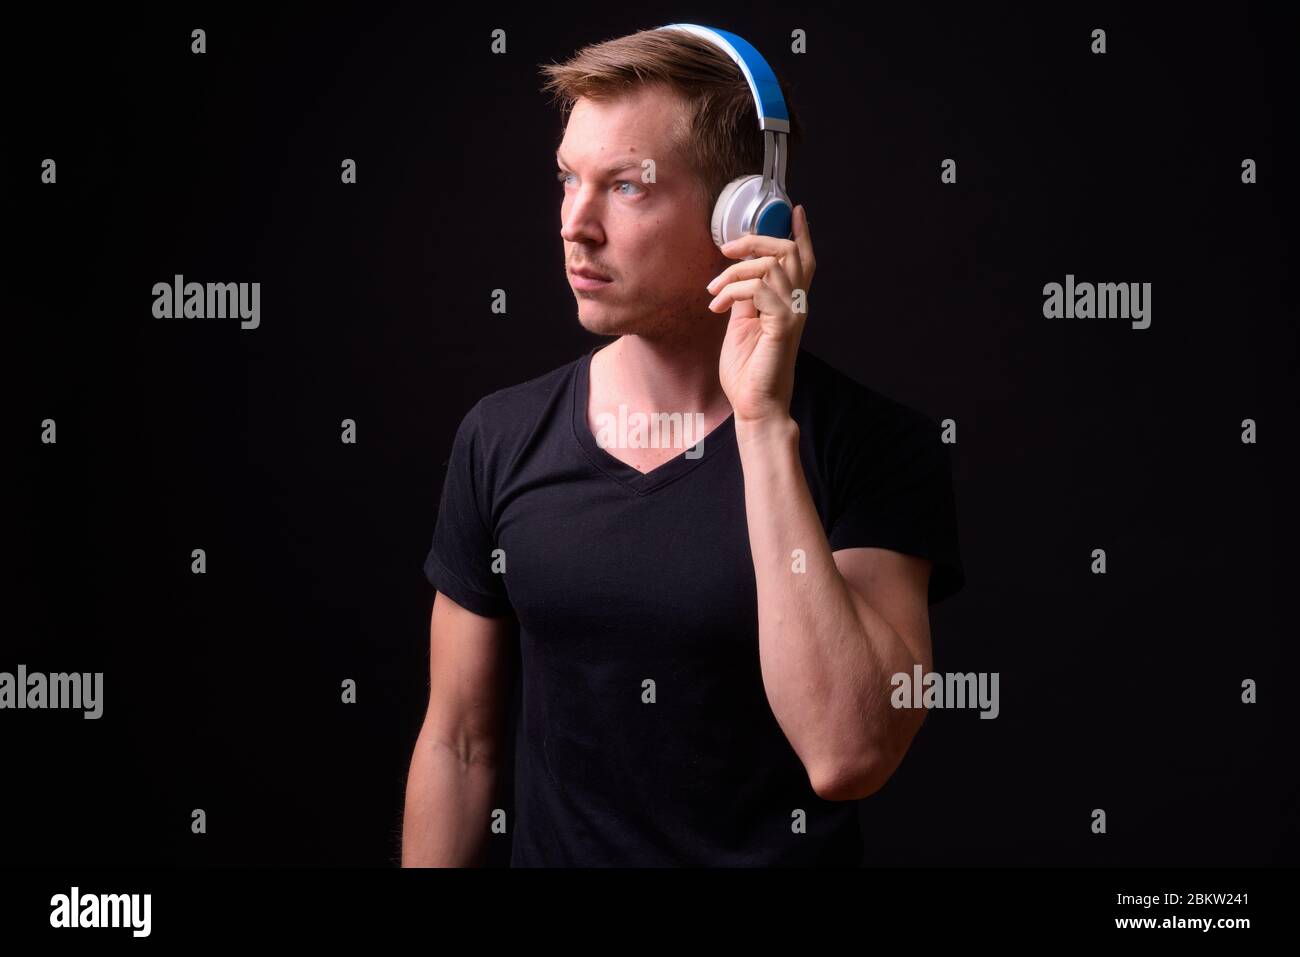 Portrait of young handsome man thinking and listening to music Stock Photo